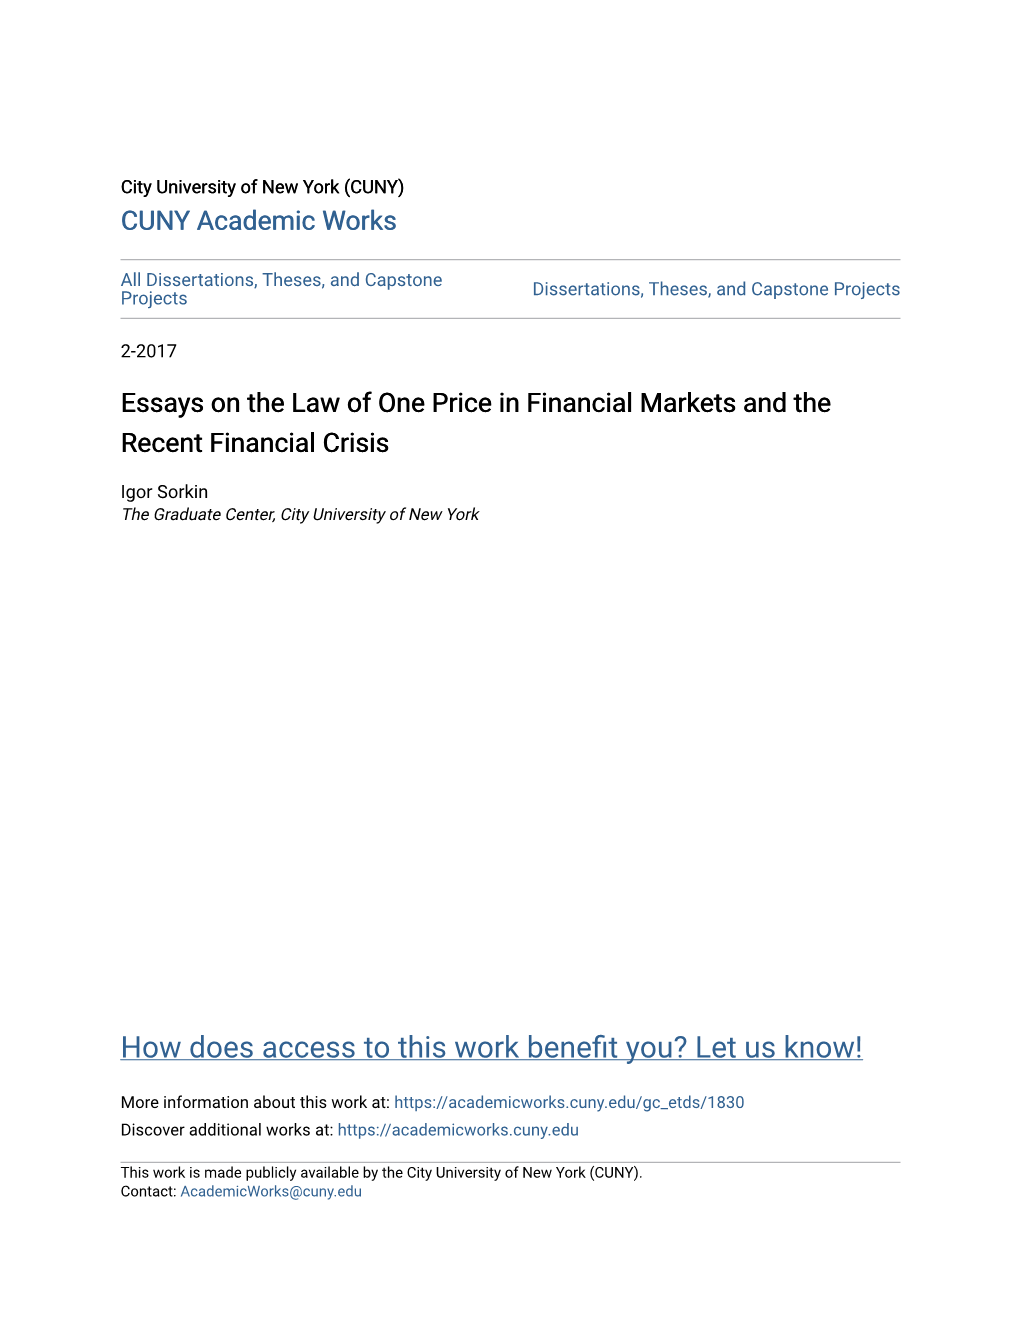 Essays on the Law of One Price in Financial Markets and the Recent Financial Crisis